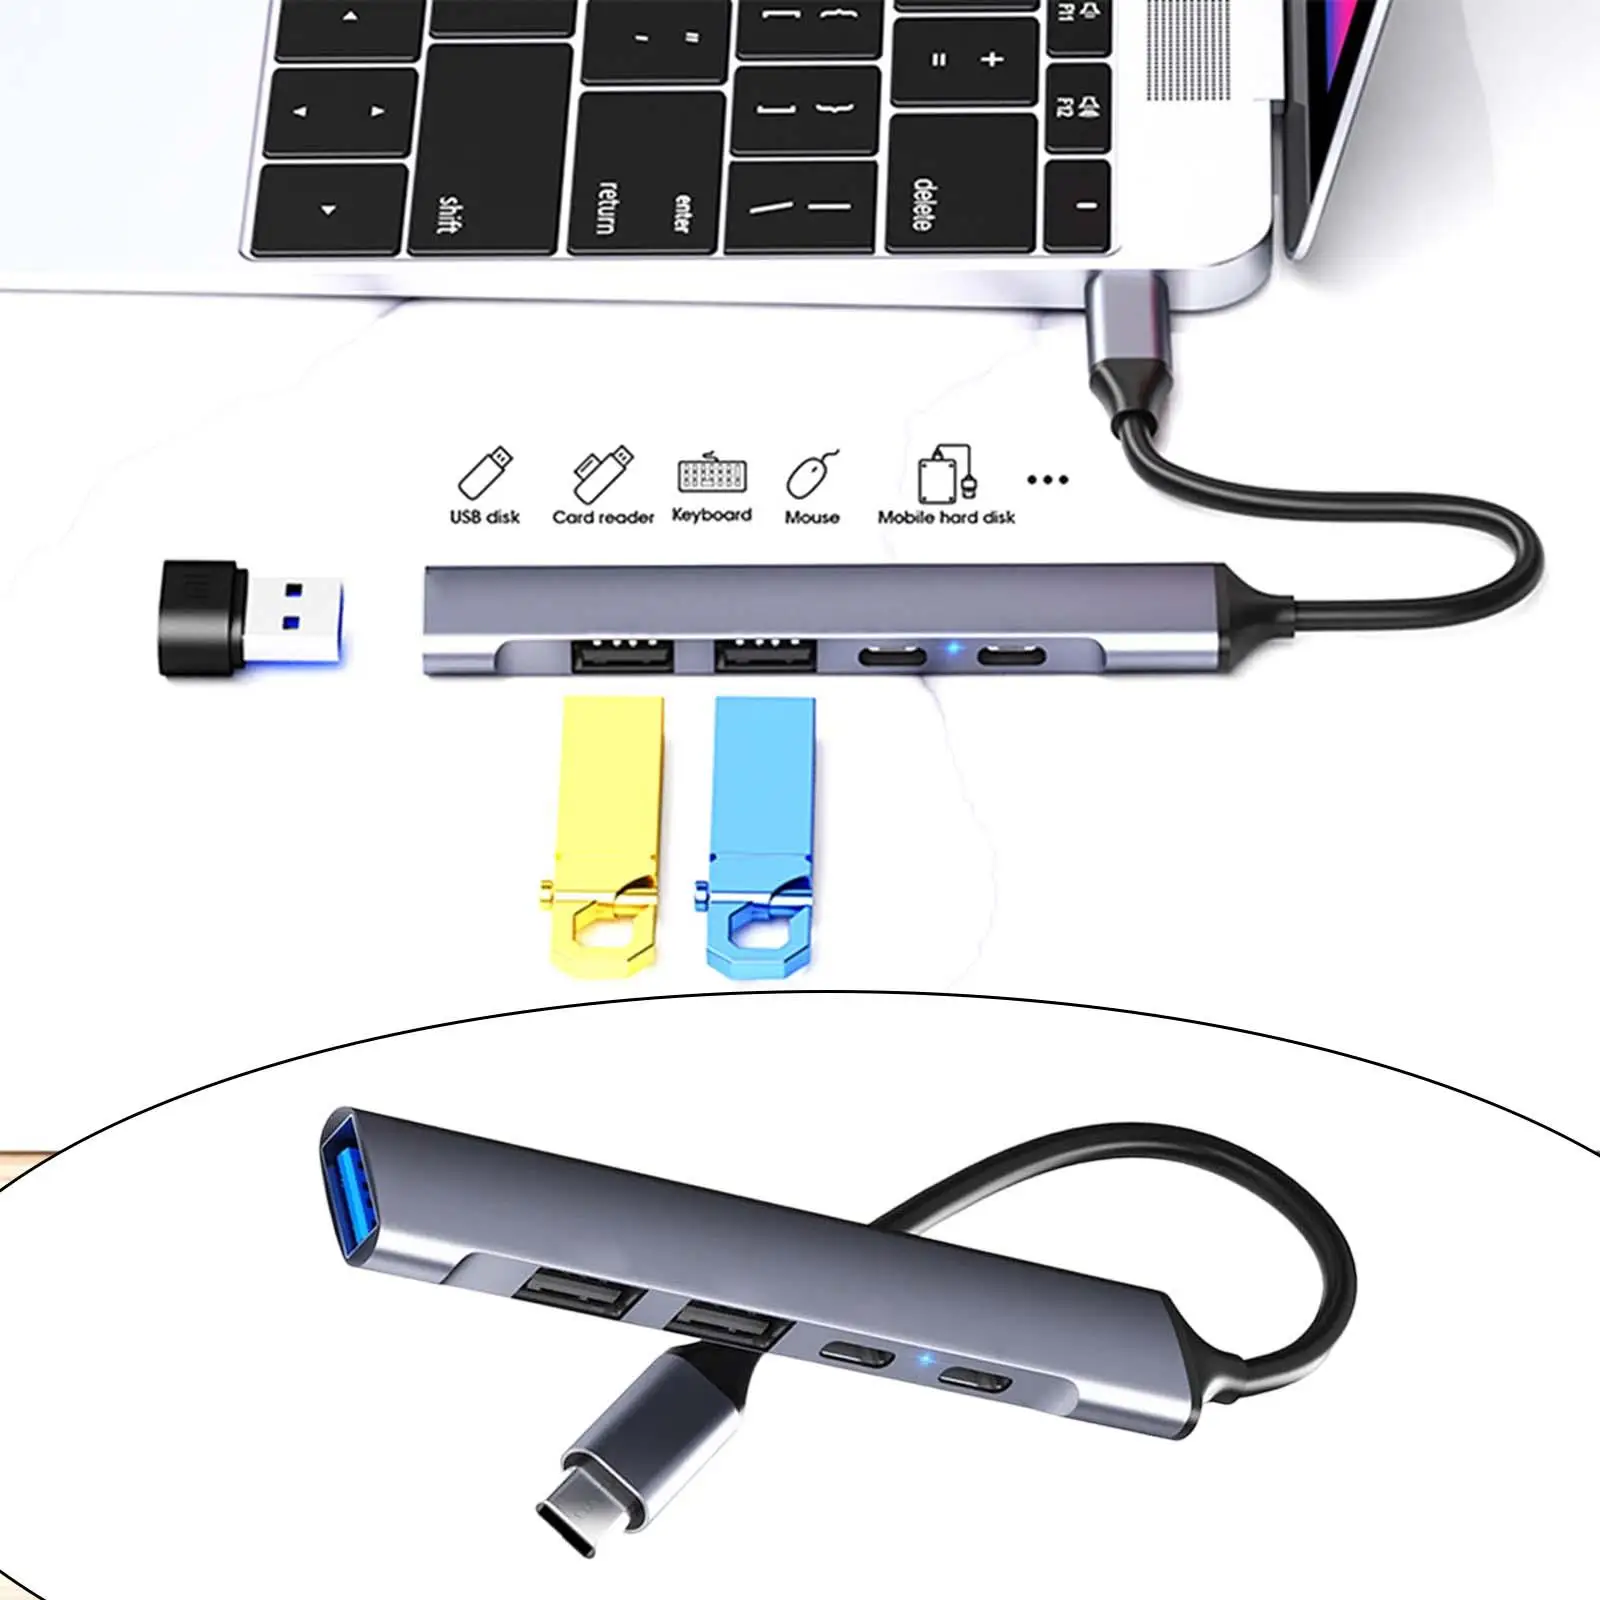 Portable USB Hub PD Fast Charging Data Transfer USB 3.0 5Gbps Converter Docking Station Multiports Adapter for Type C Devices